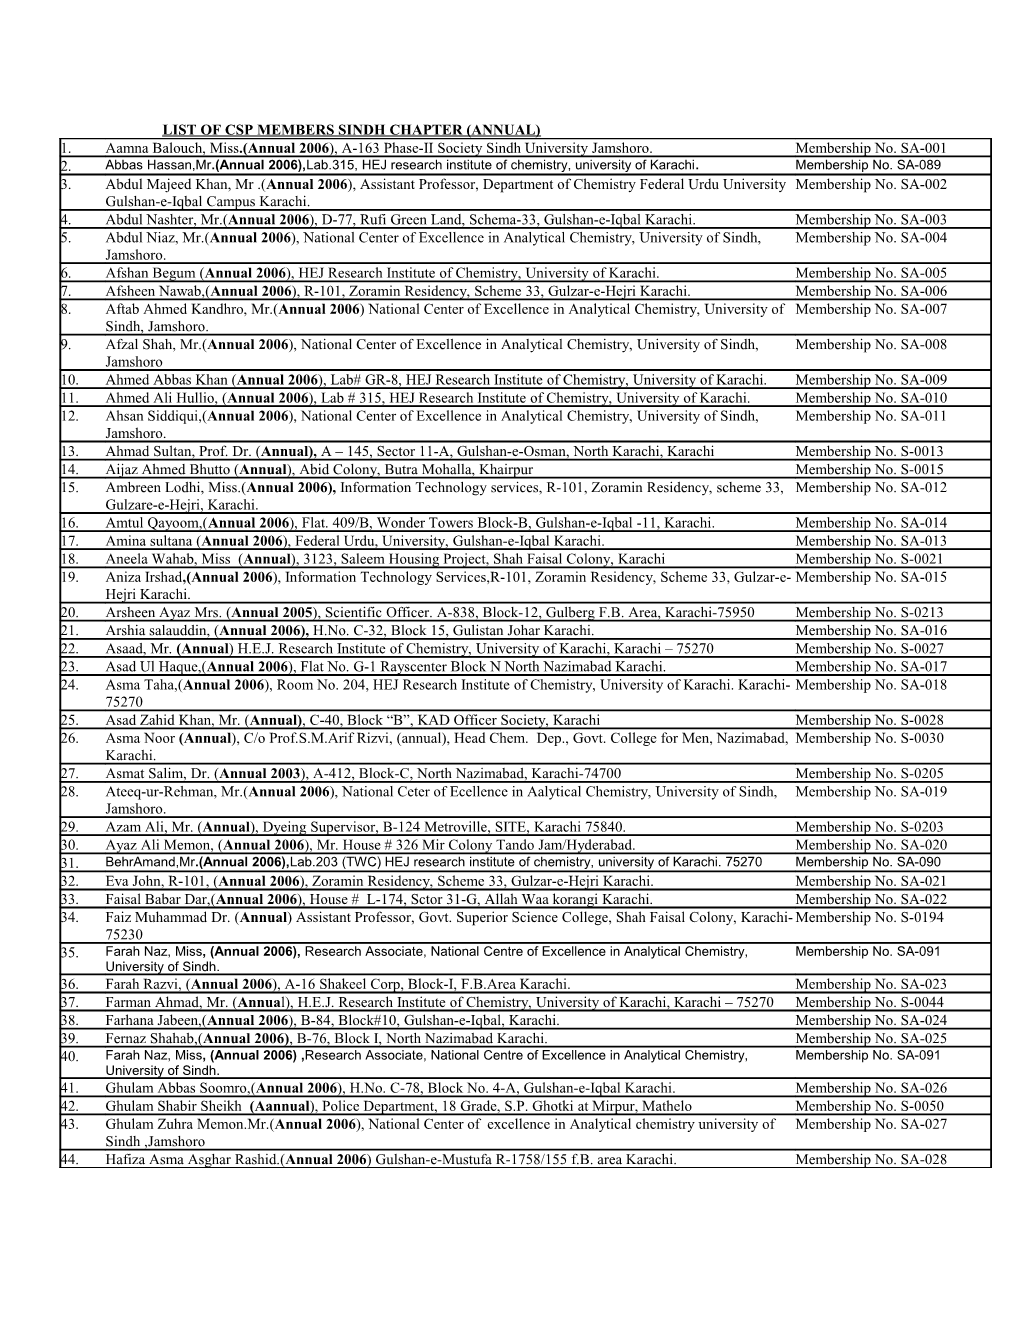 List of Csp Members Sindh Chapter (Annual)